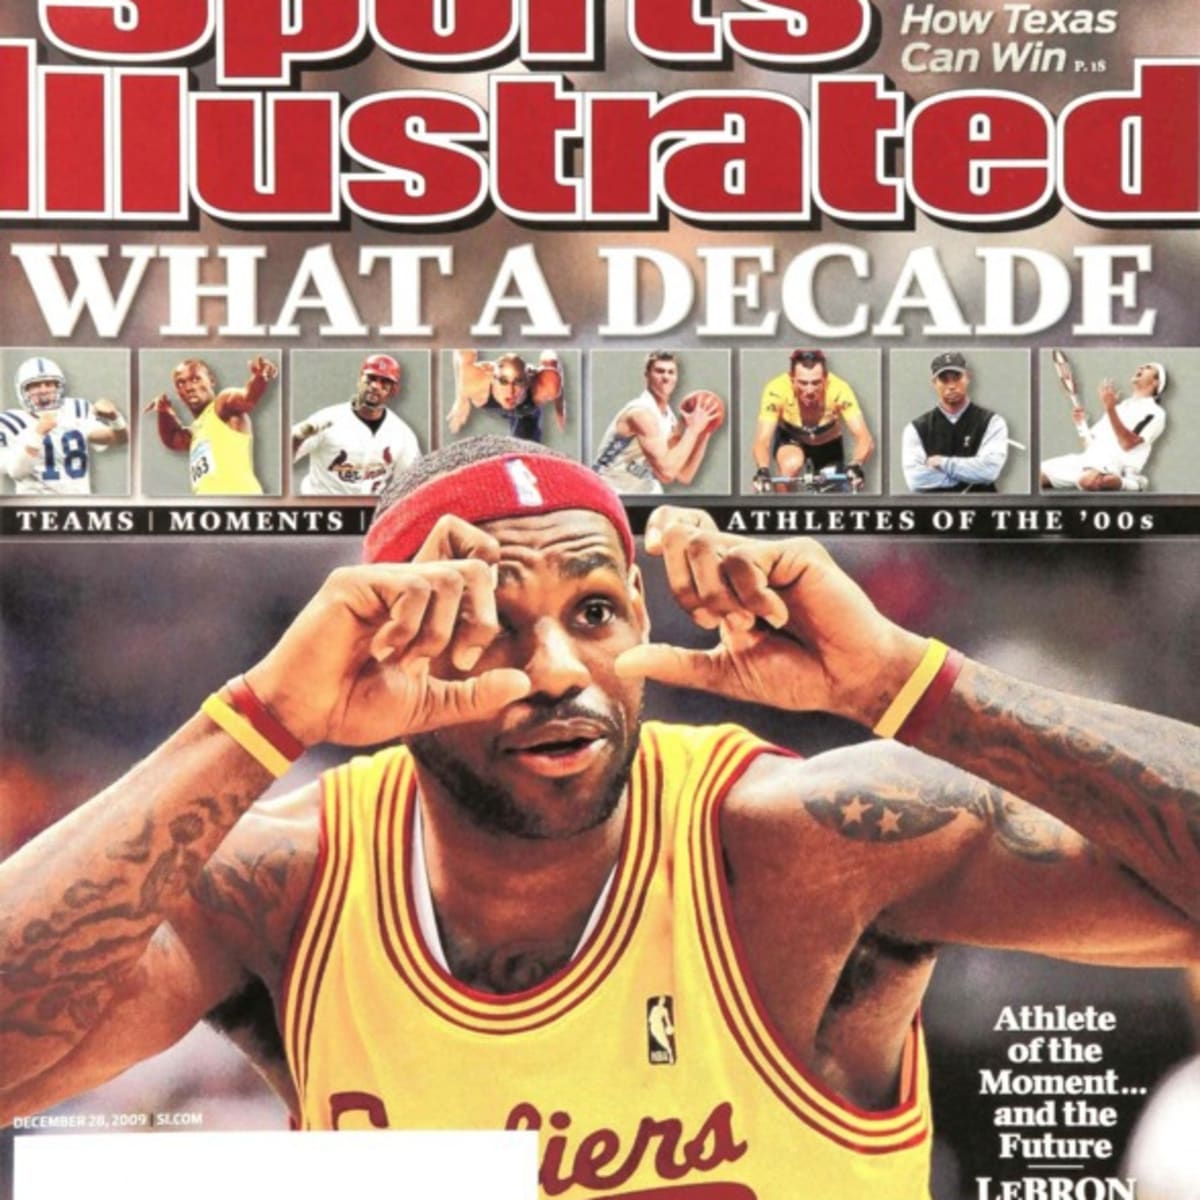 Good To The Very Last Out - Sports Illustrated Vault